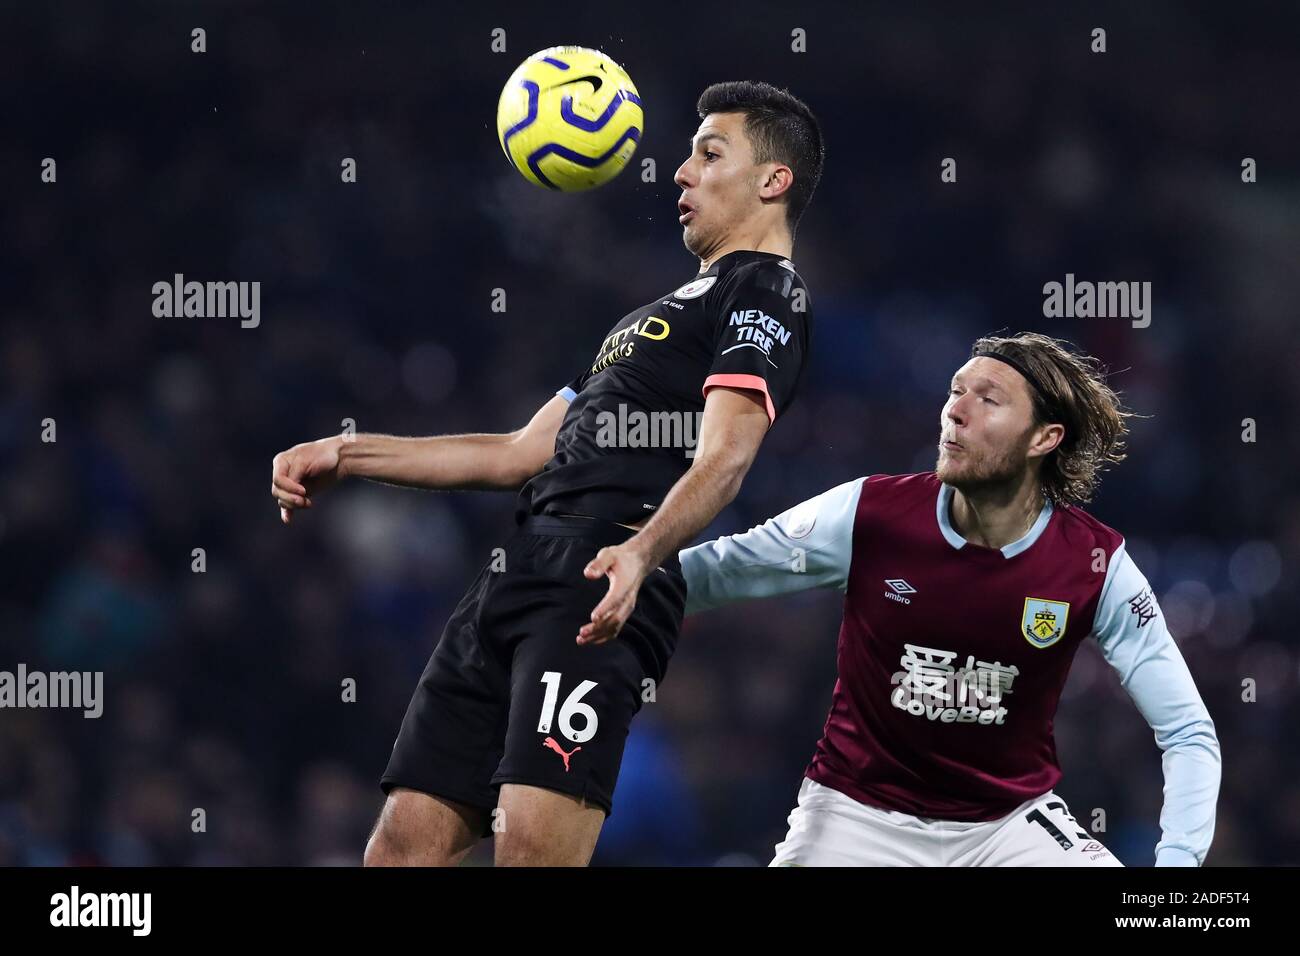 BURNLEY, ENGLAND - DECEMBER 03: Rodri (L) of Manchester City heads the ball away from Jeff Hendrick of Burnley during the Premier League match between Burnley FC and Manchester City at Turf Moor on December 3, 2019 in Burnley, United Kingdom. (Photo by MB Media) Stock Photo